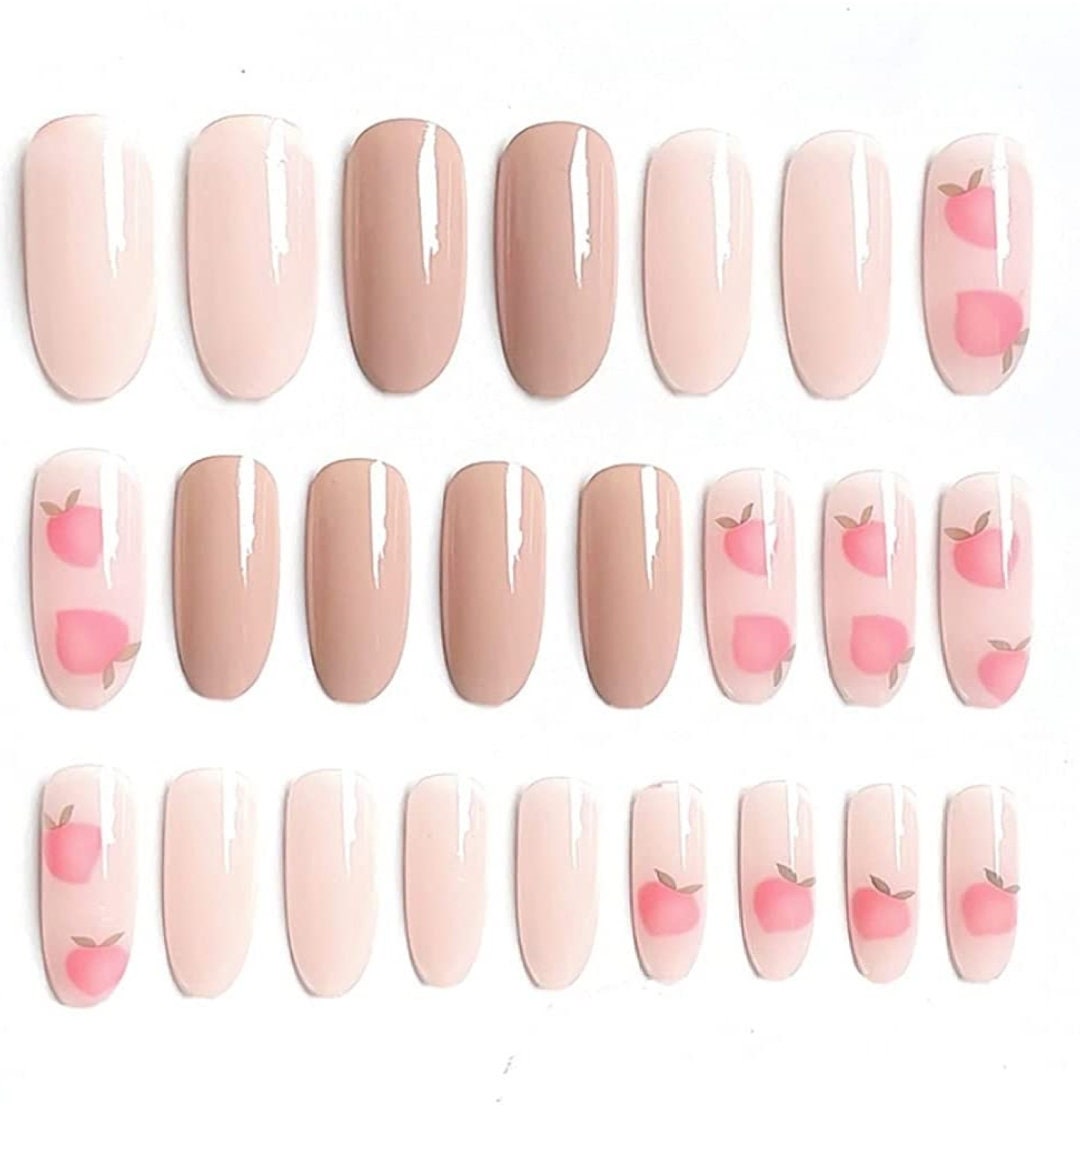 24 Peachy Press on nails glue on nude pink summer pretty long oval almond design